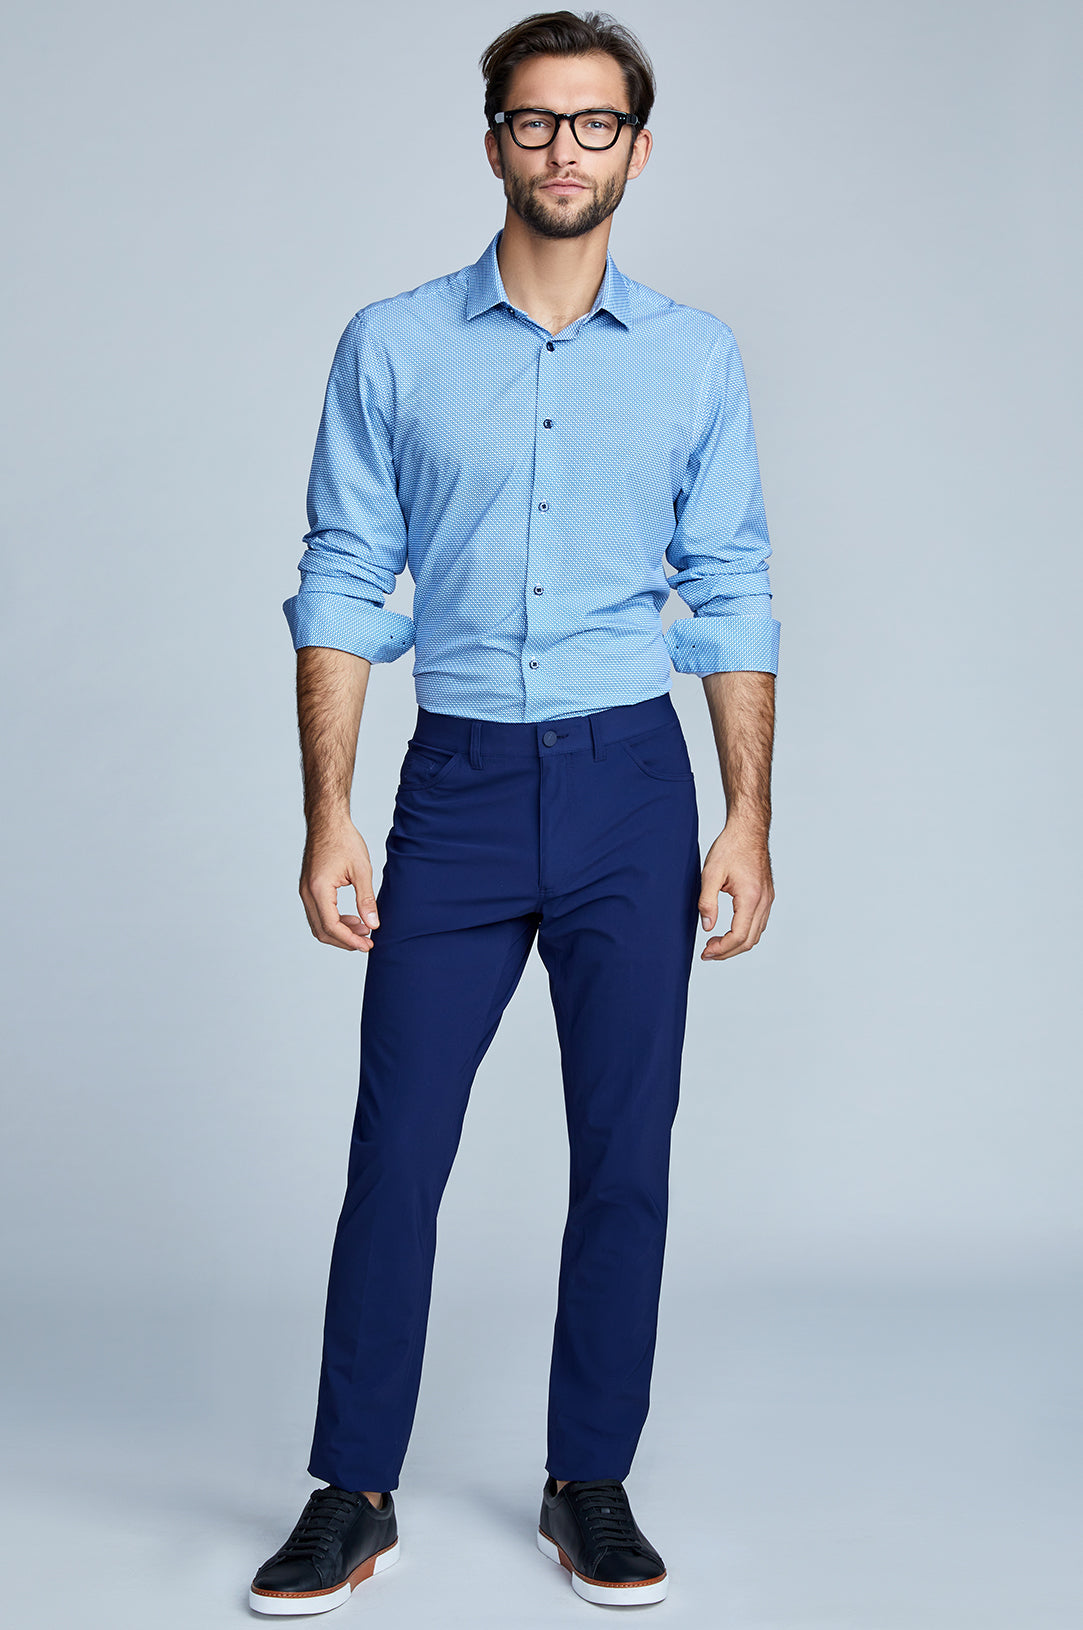 Shirt and Trousers Combination | Shirts & Pants Combinations